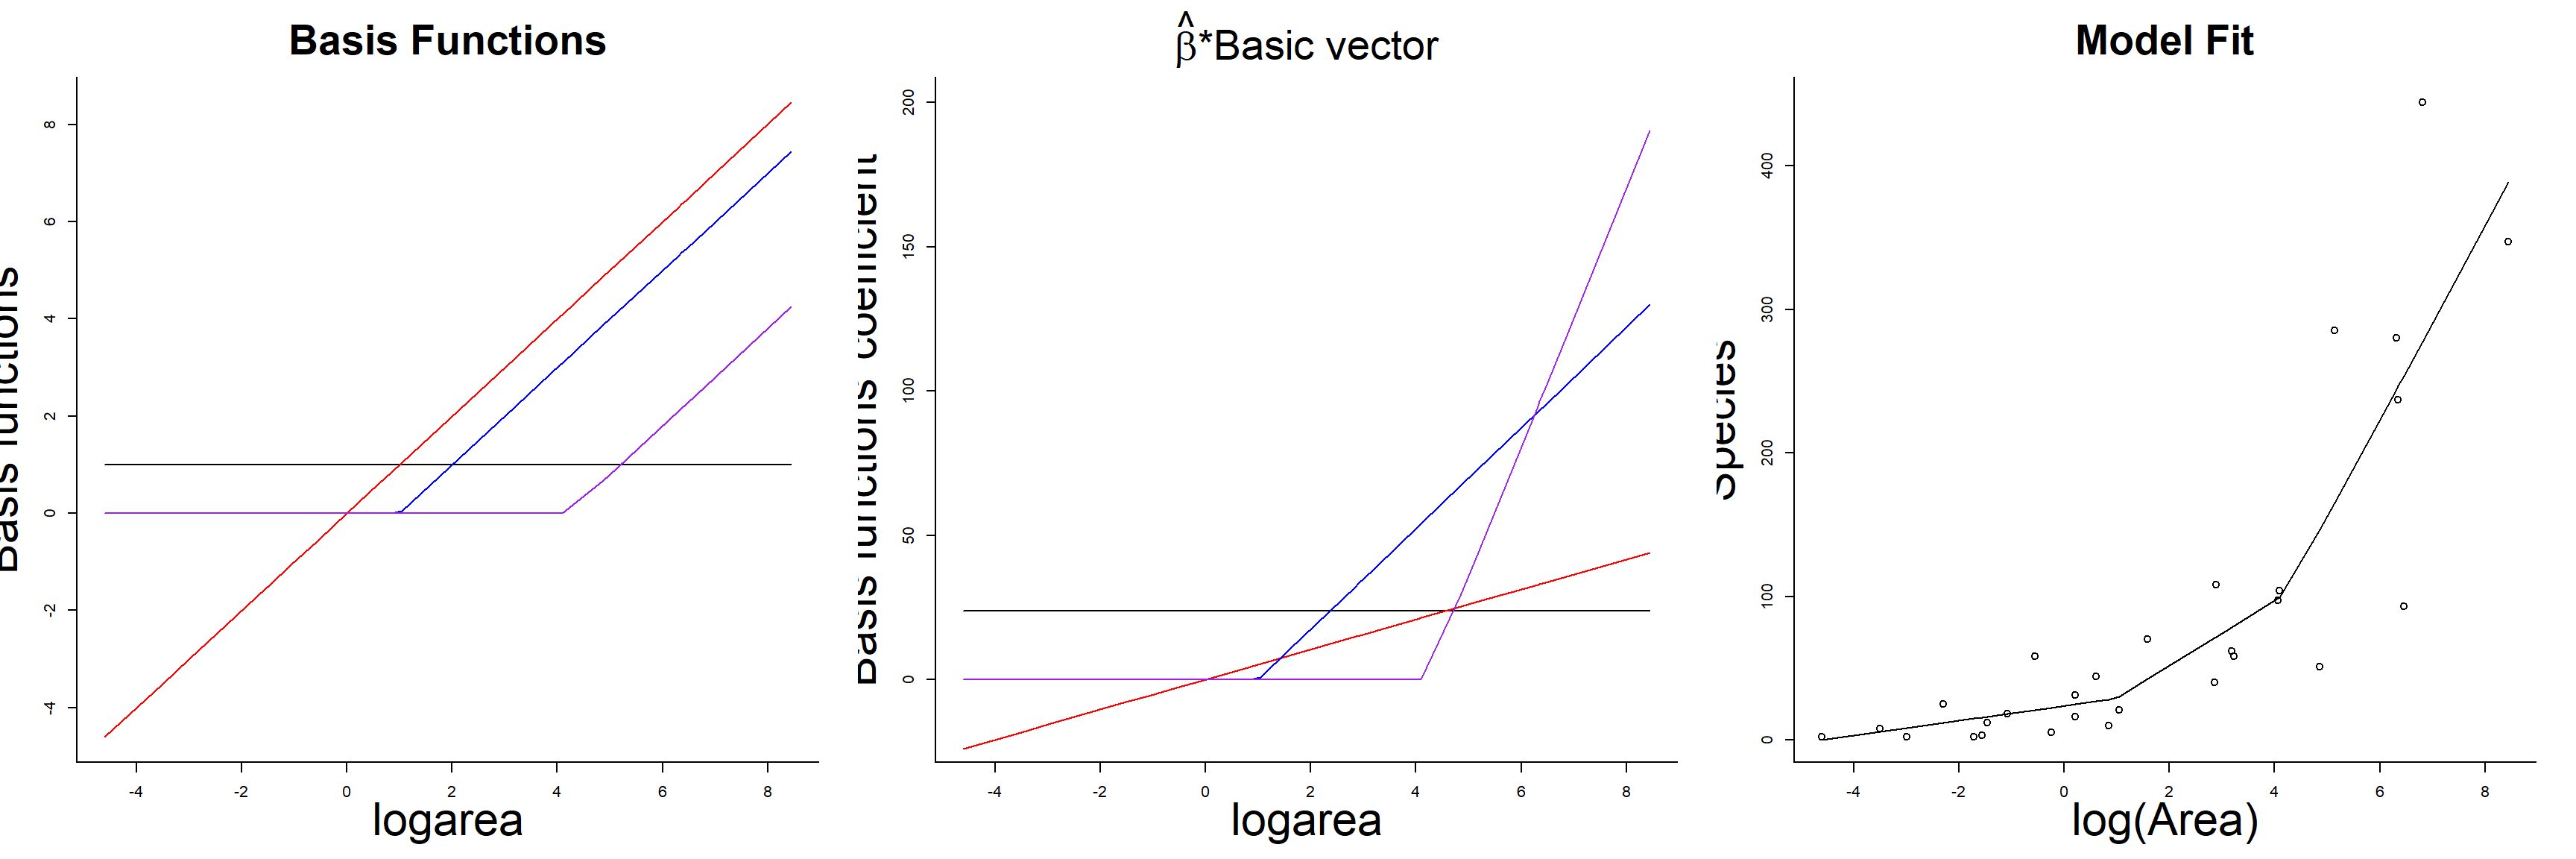 Basis vectors, weighted basis vectors, and predicted values formed by summing the weighted basis vectors in the linear spline model fit to species-area data.